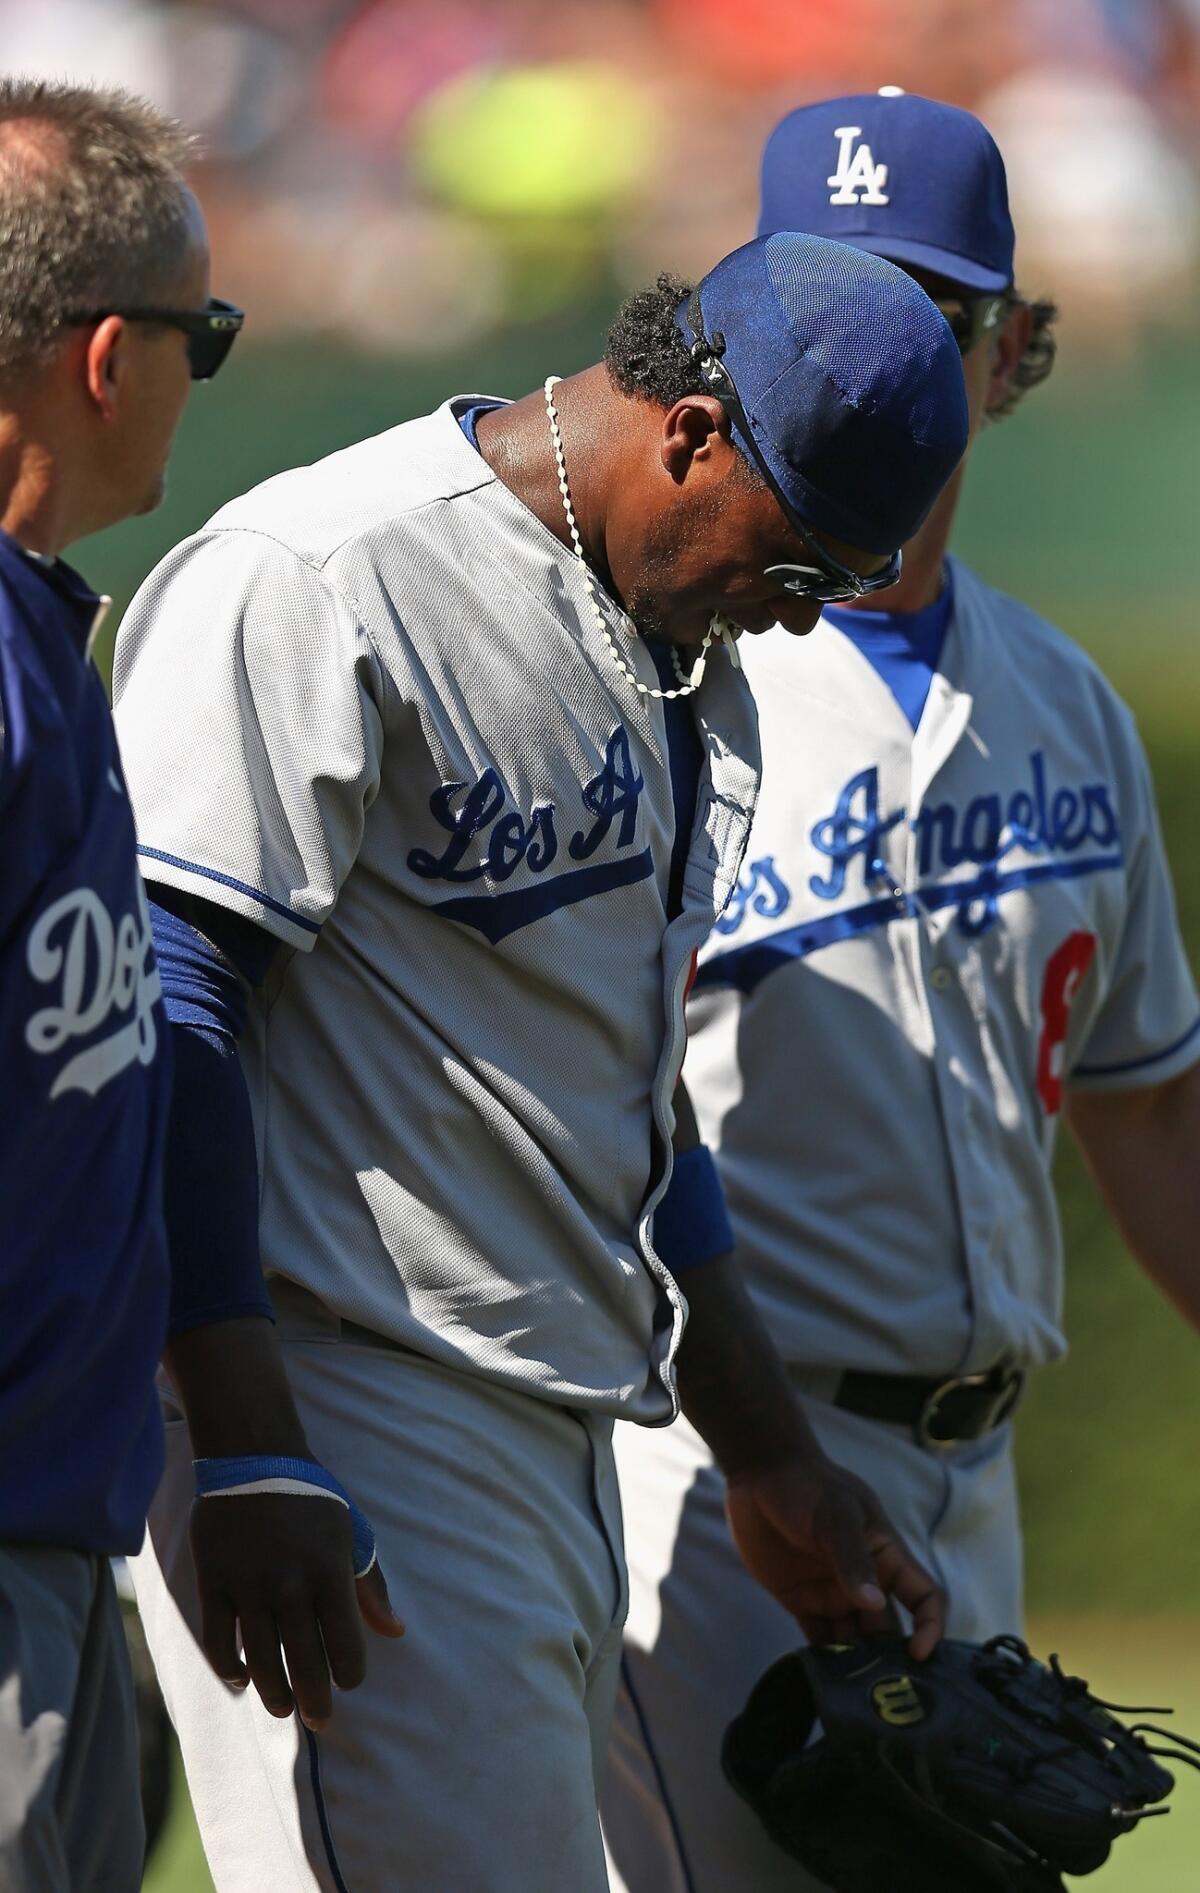 Dodgers shortstop Hanley Ramirez walks off the field after injuring his shoulder against the Chicago Cubs on Sunday.